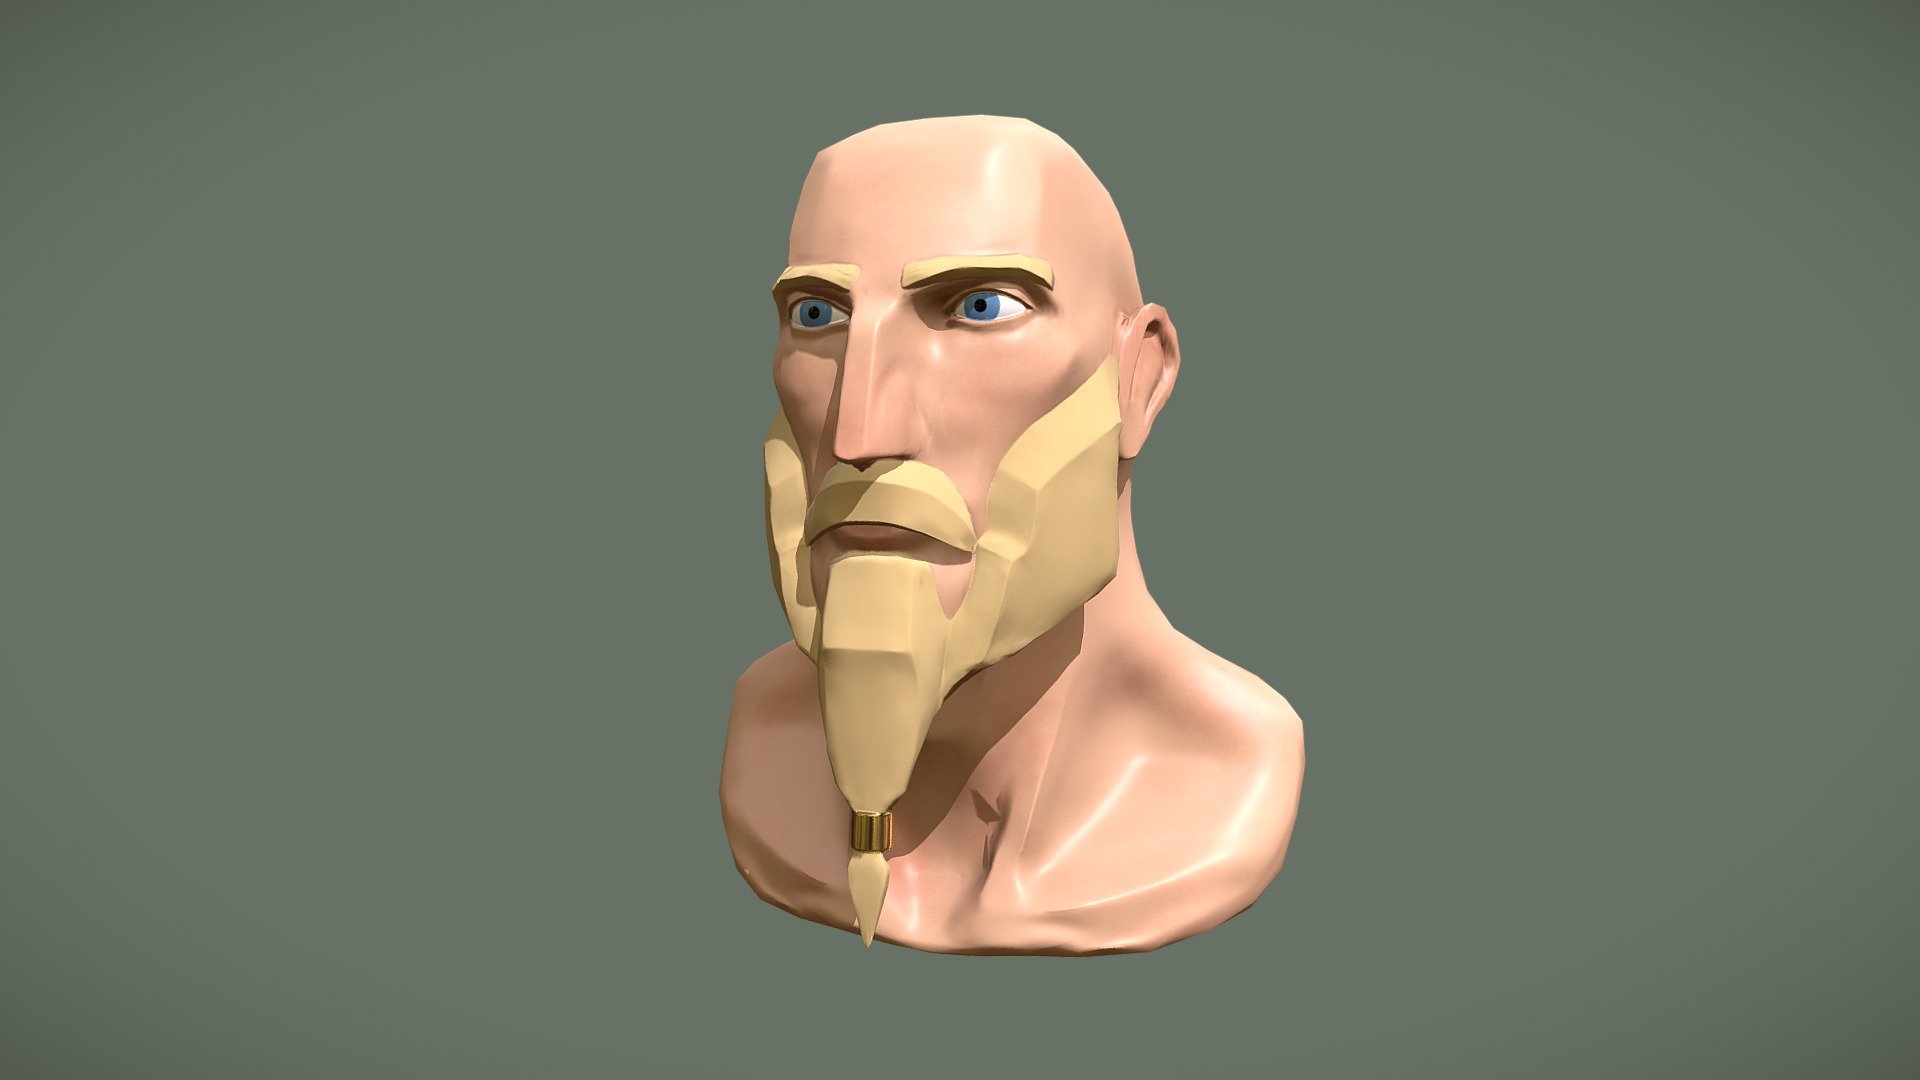 This low poly (&lt;8k tris) stylised Norse-inspired head bust was modelled in Z-brush and textured (2048x2048p) in Substance Painter 3d model